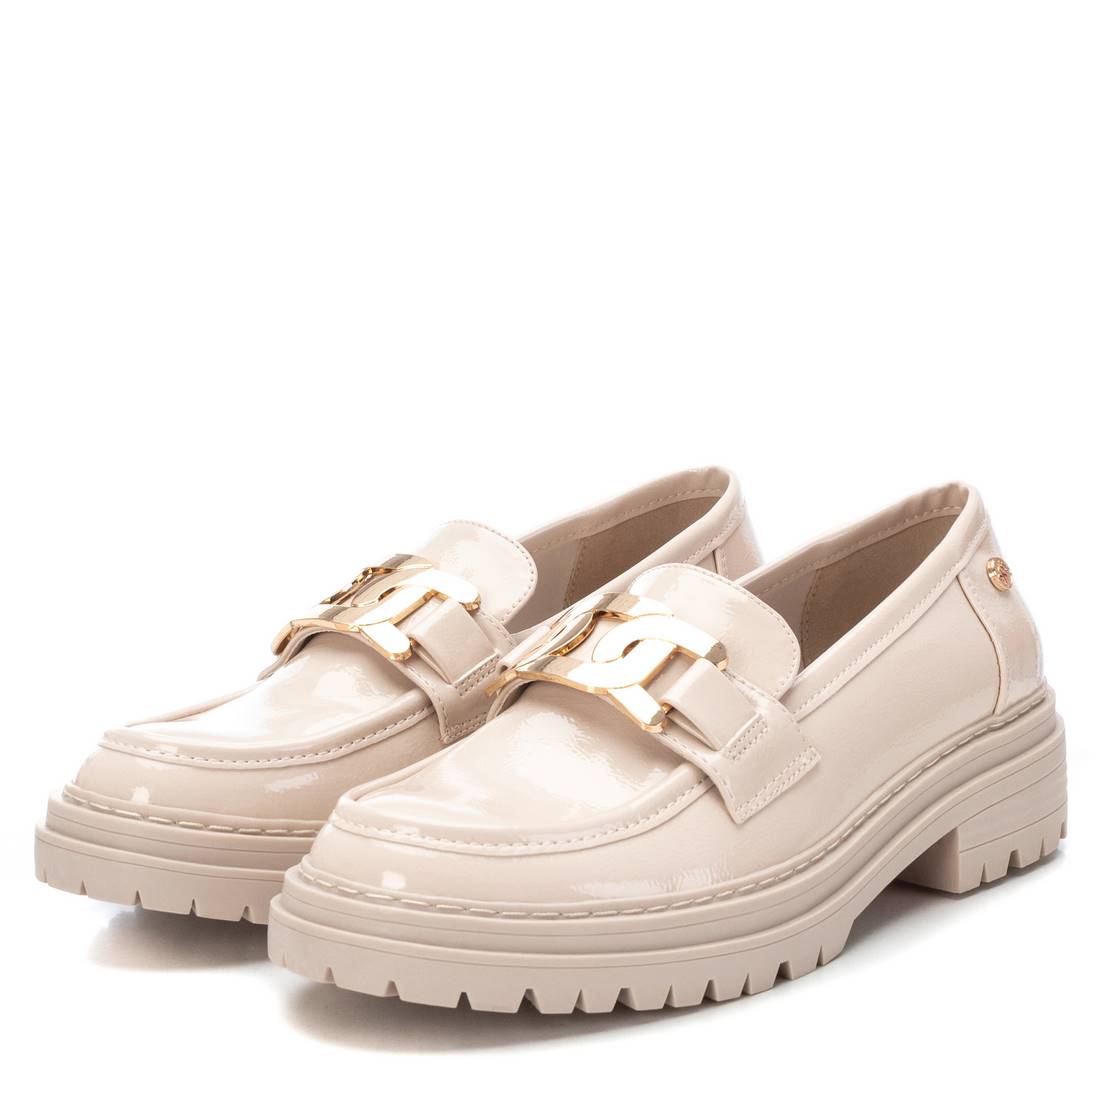 Xti 141727 Beige Casual Shoes